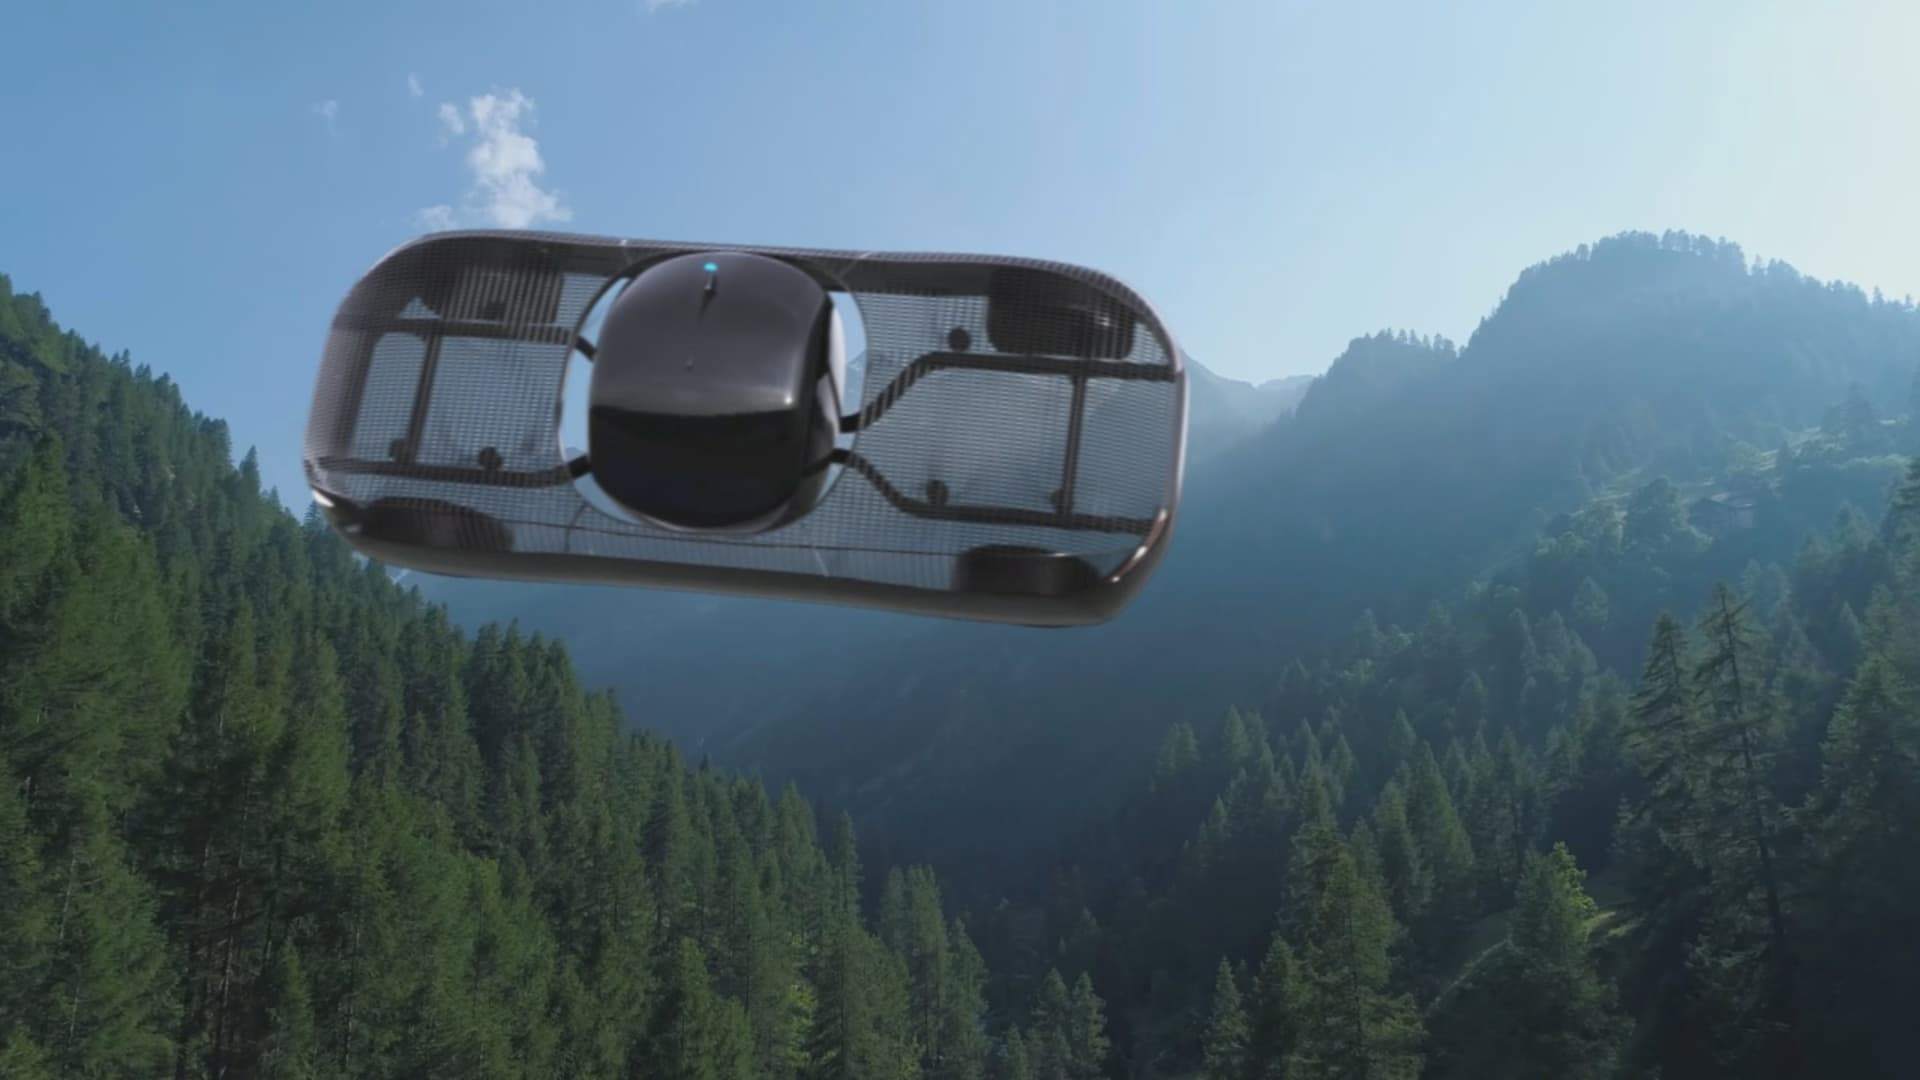 Within the world of flying cars and trucks, or eVTOLs, which are shifting closer to reality